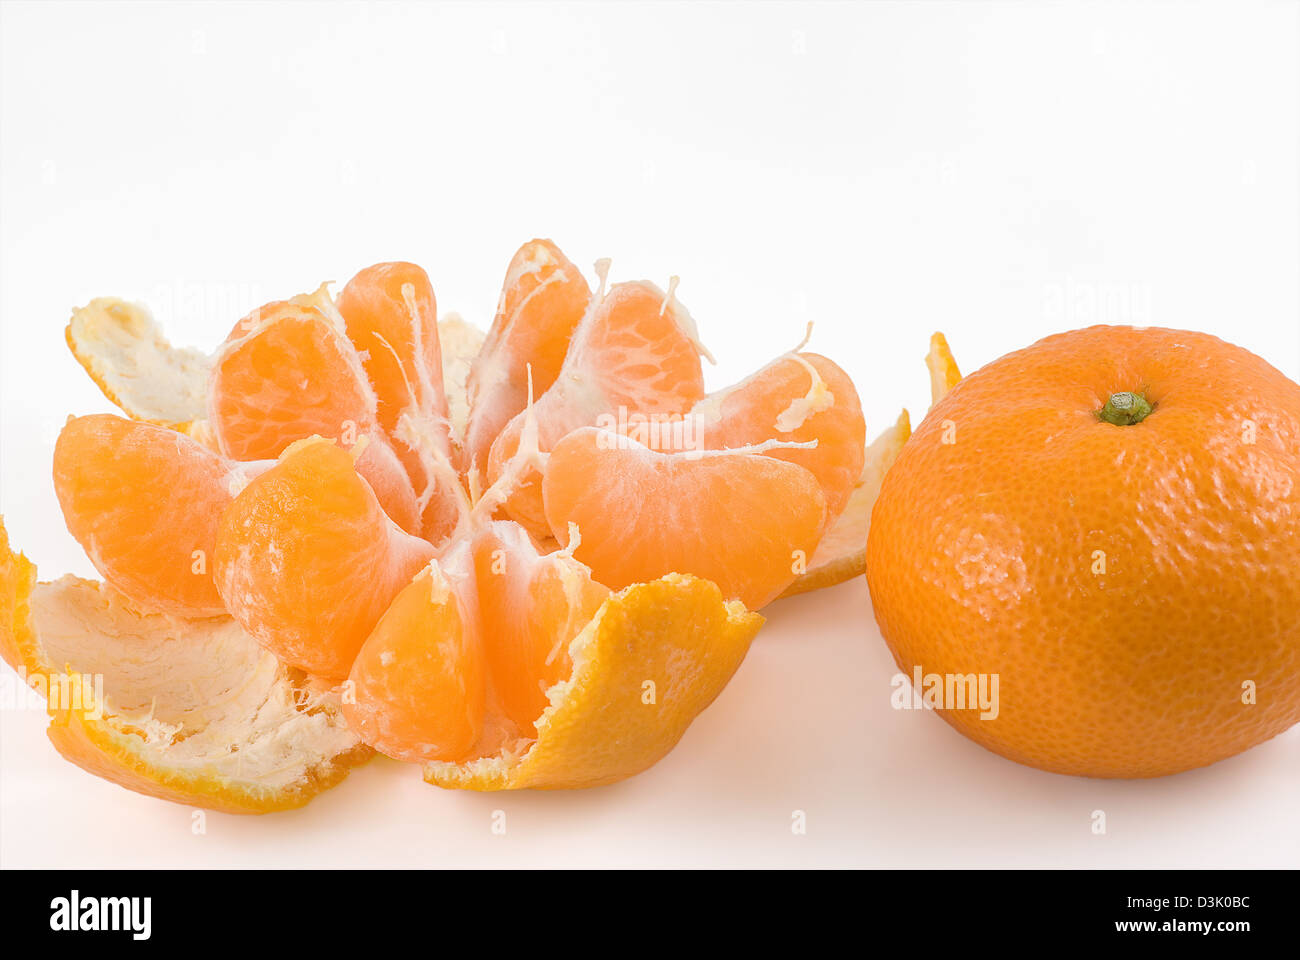 Two tangerines are photographed on a white background Stock Photo